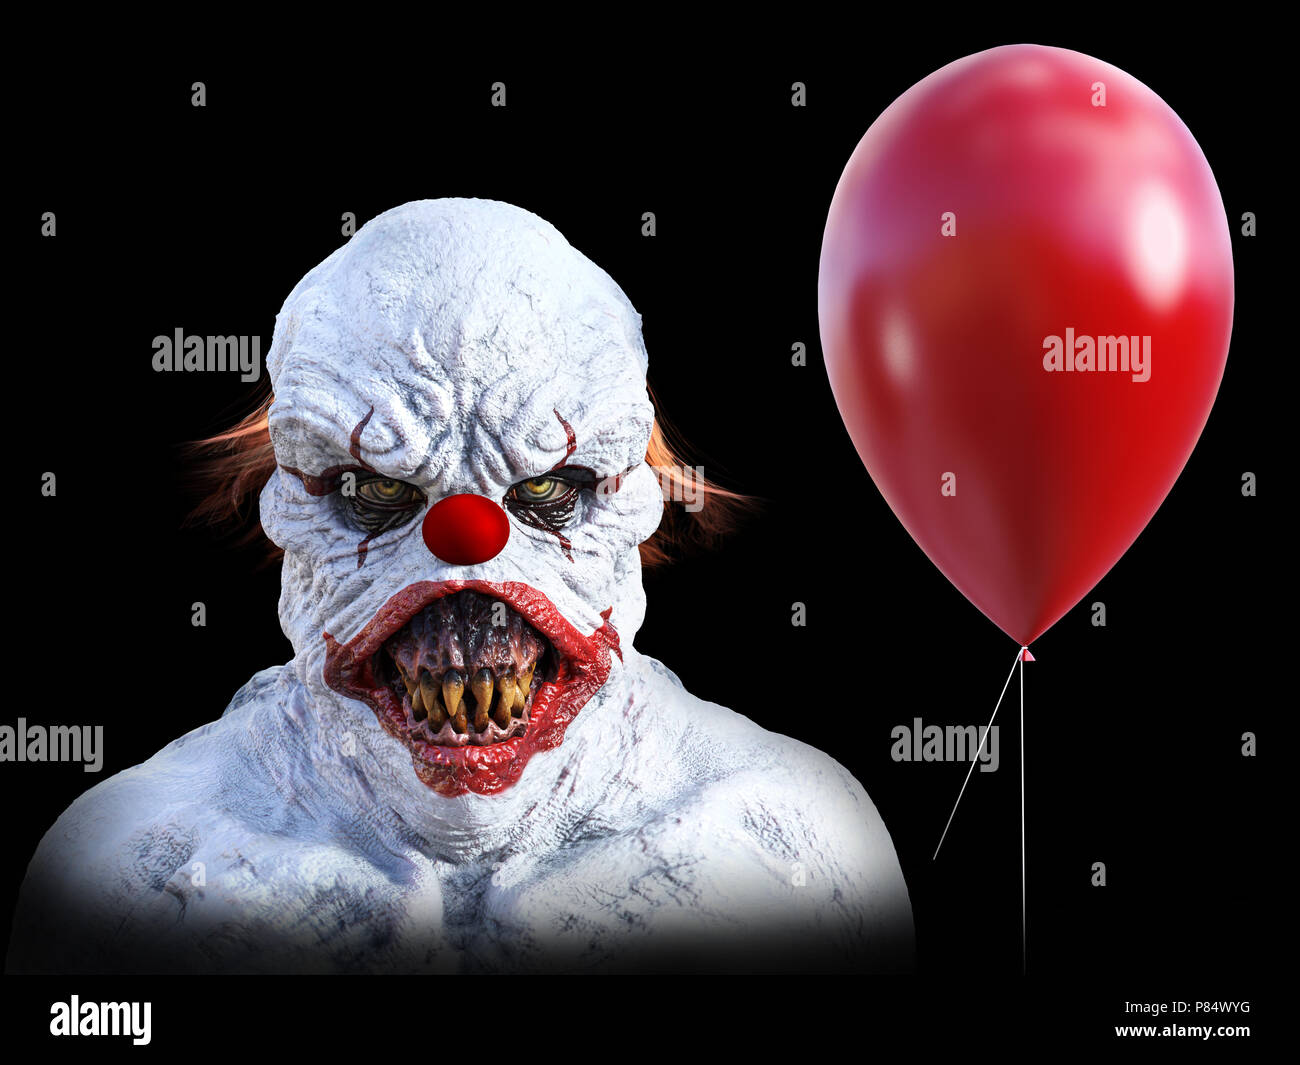 Portrait of an evil looking clown holding a red balloon, 3D rendering.  Black background Stock Photo - Alamy